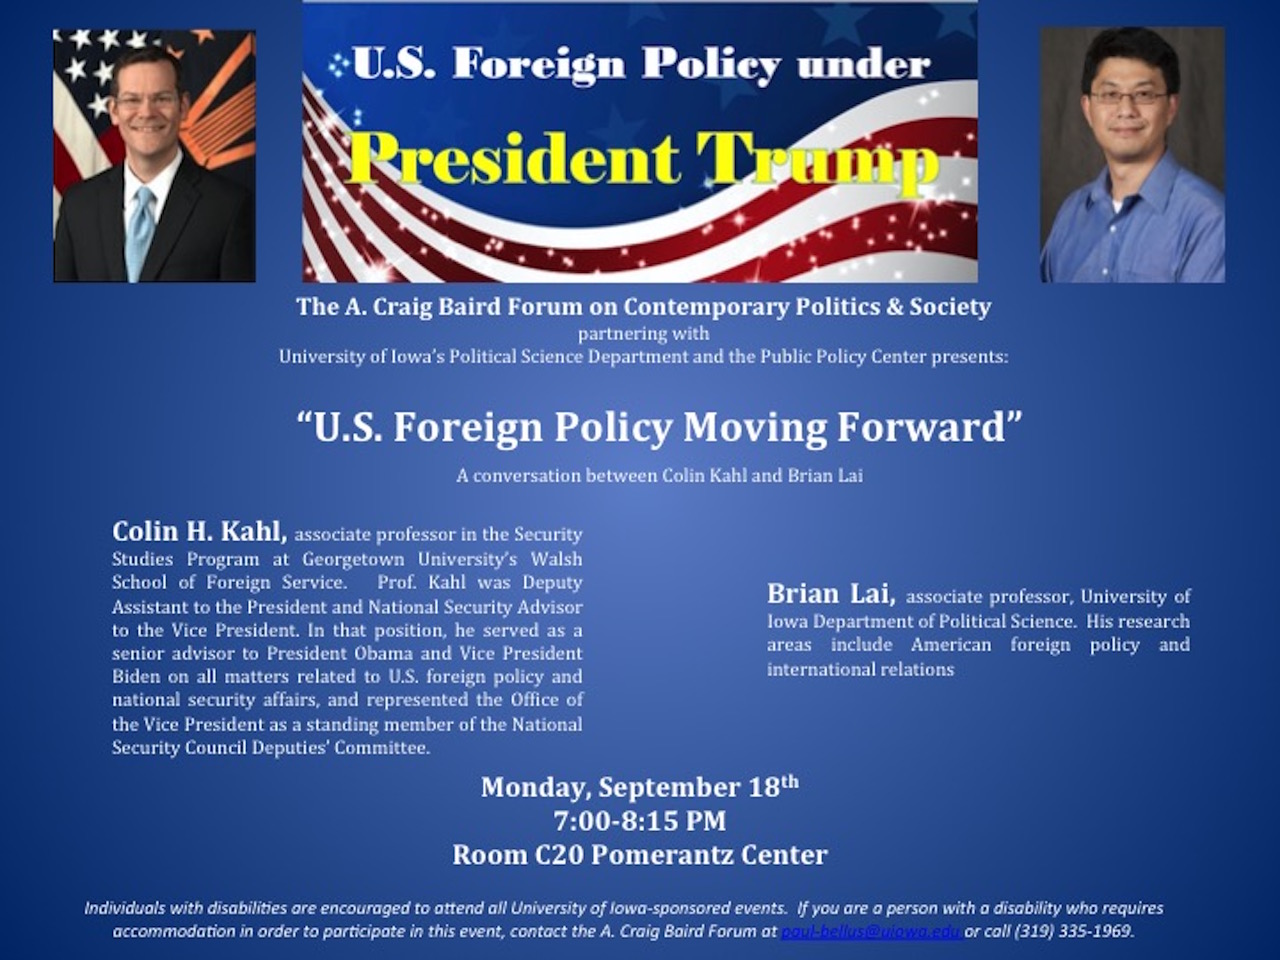 U.S. Foreign Policy Moving Forward